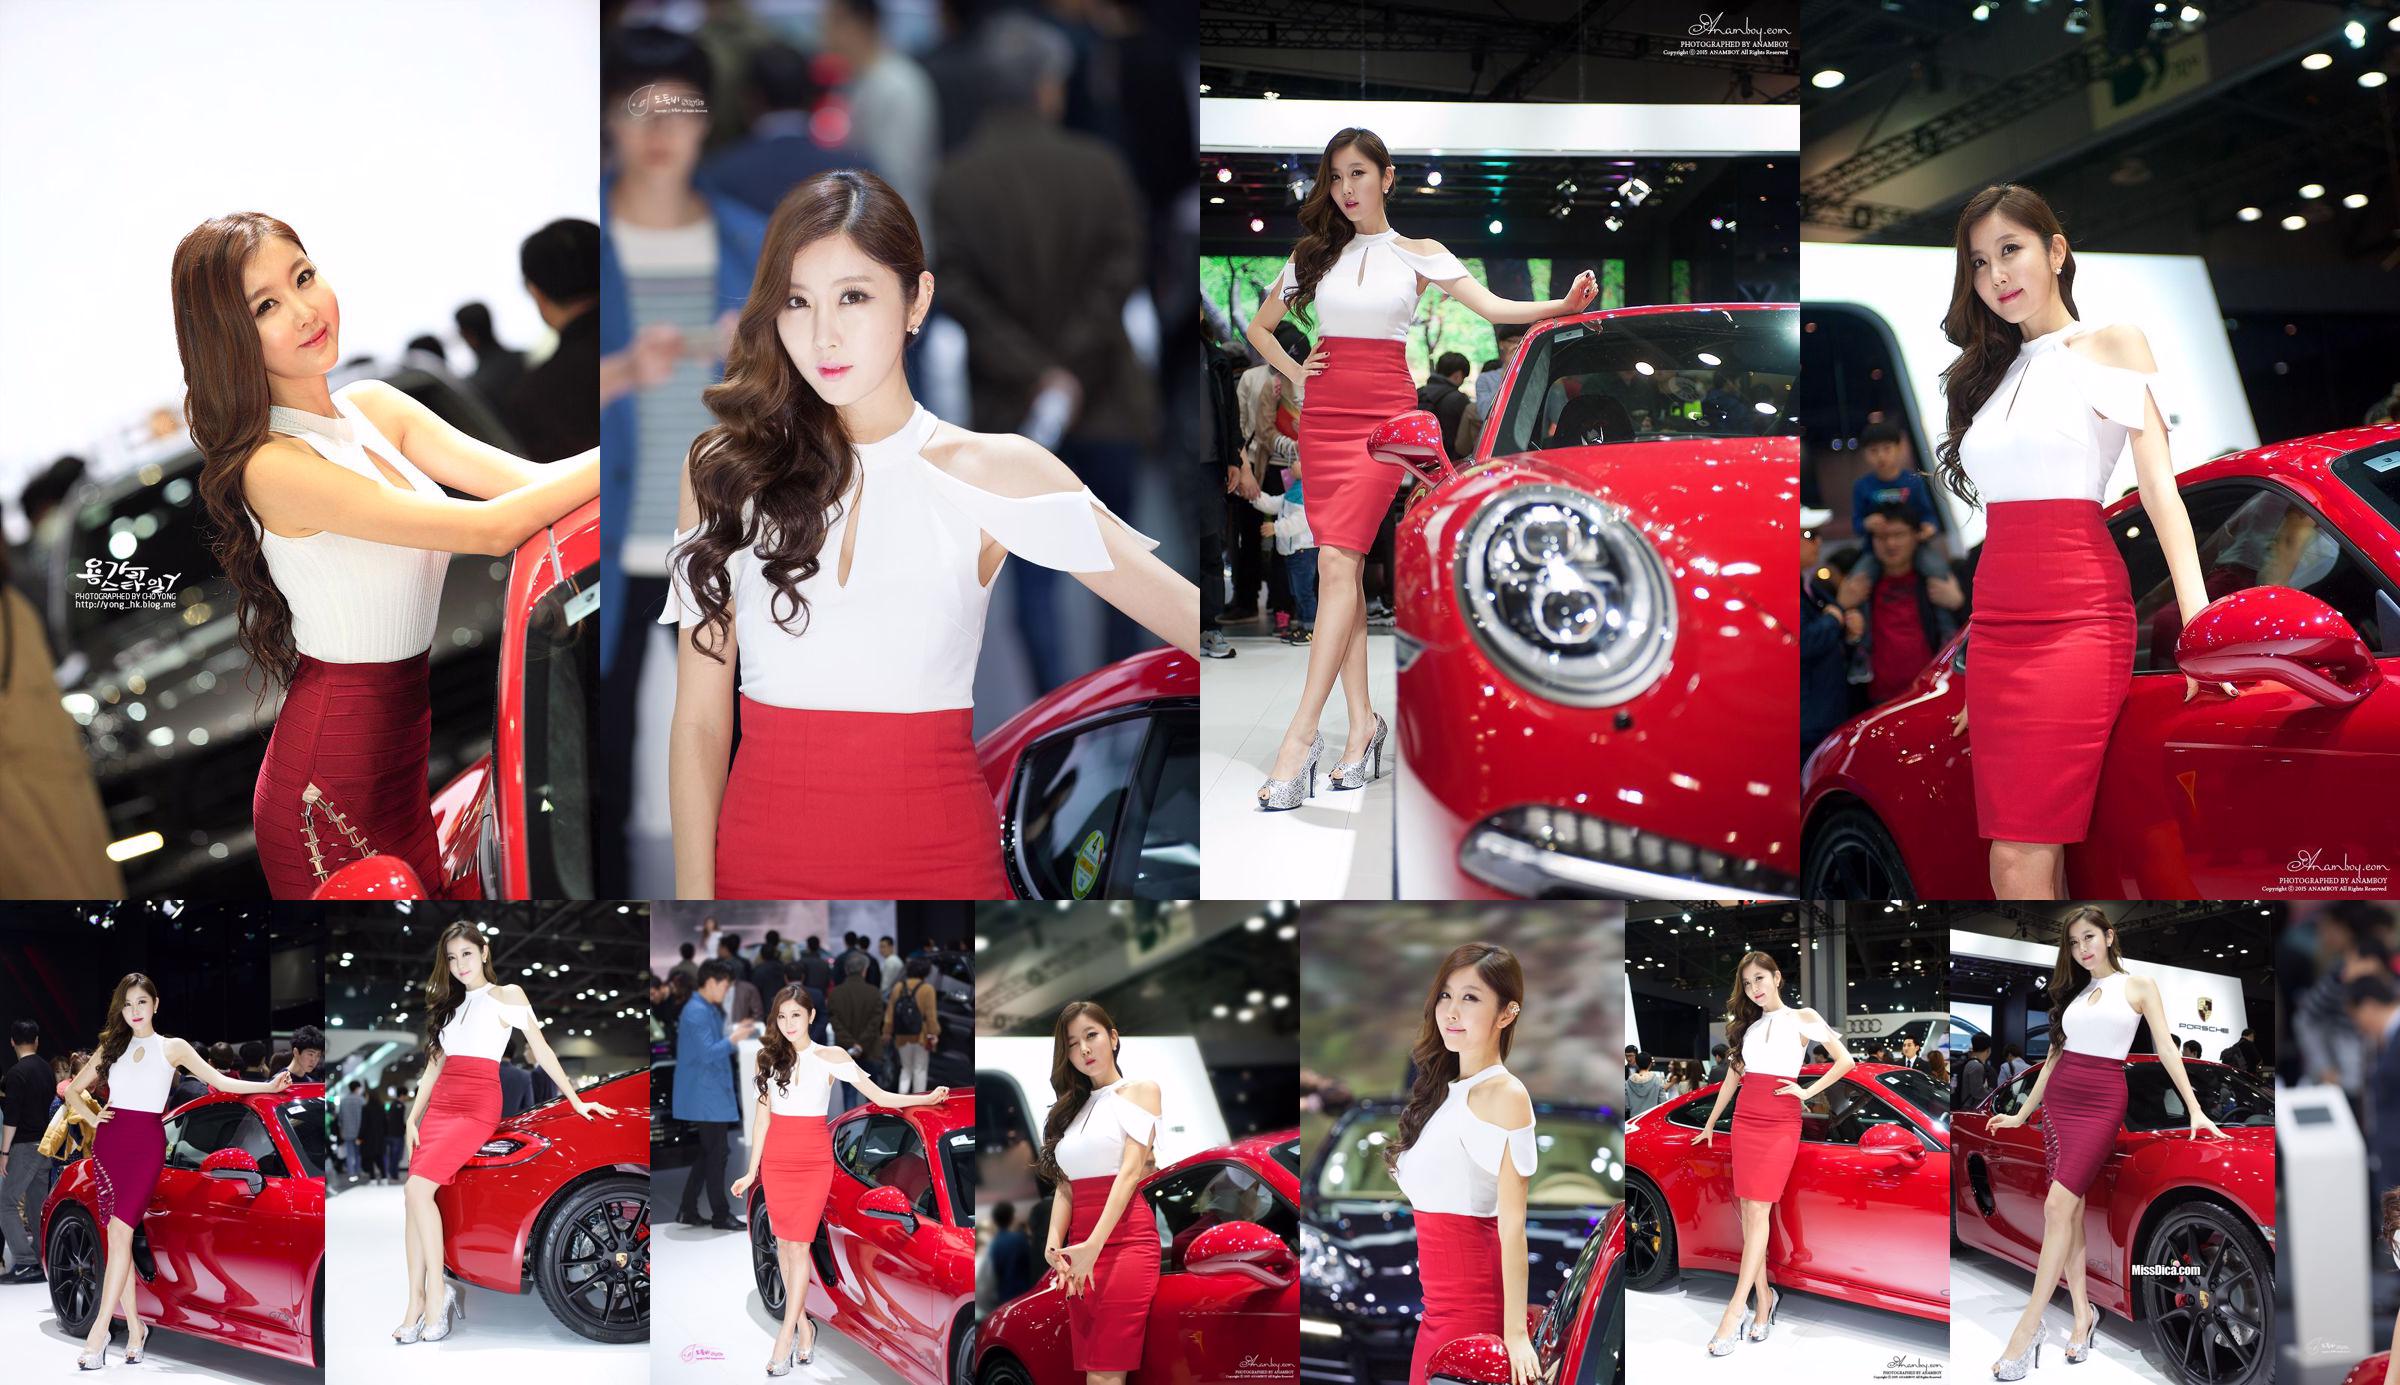 Photo Collection of Korean Car Model Cui Xingya/Cui Xinger's "Red Skirt Series at Auto Show" No.4eff42 Page 1